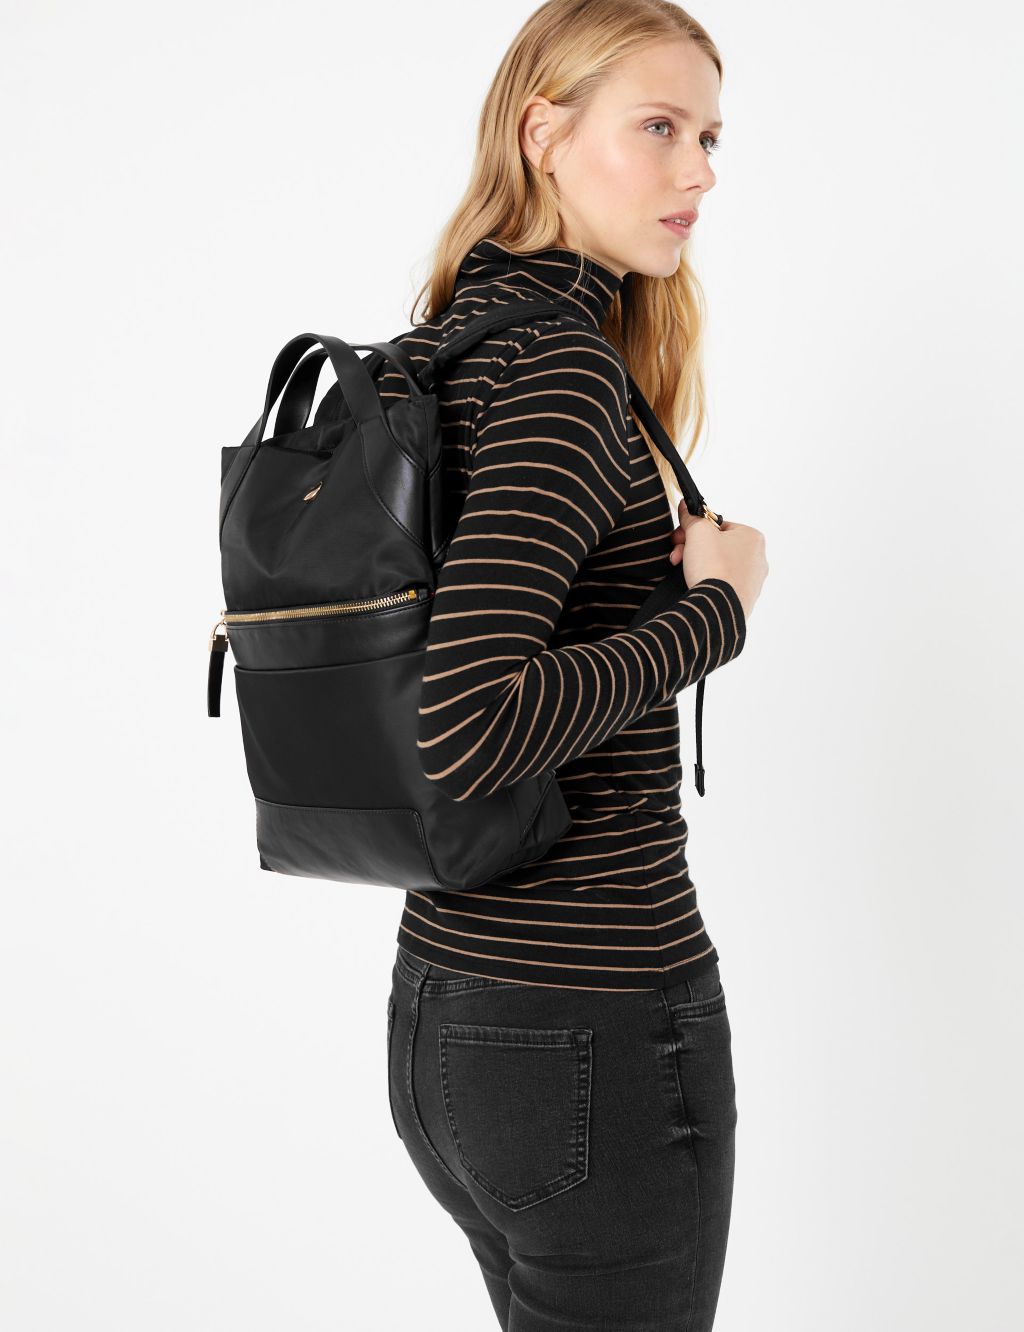 Backpack Bag | M&S Collection | M&S